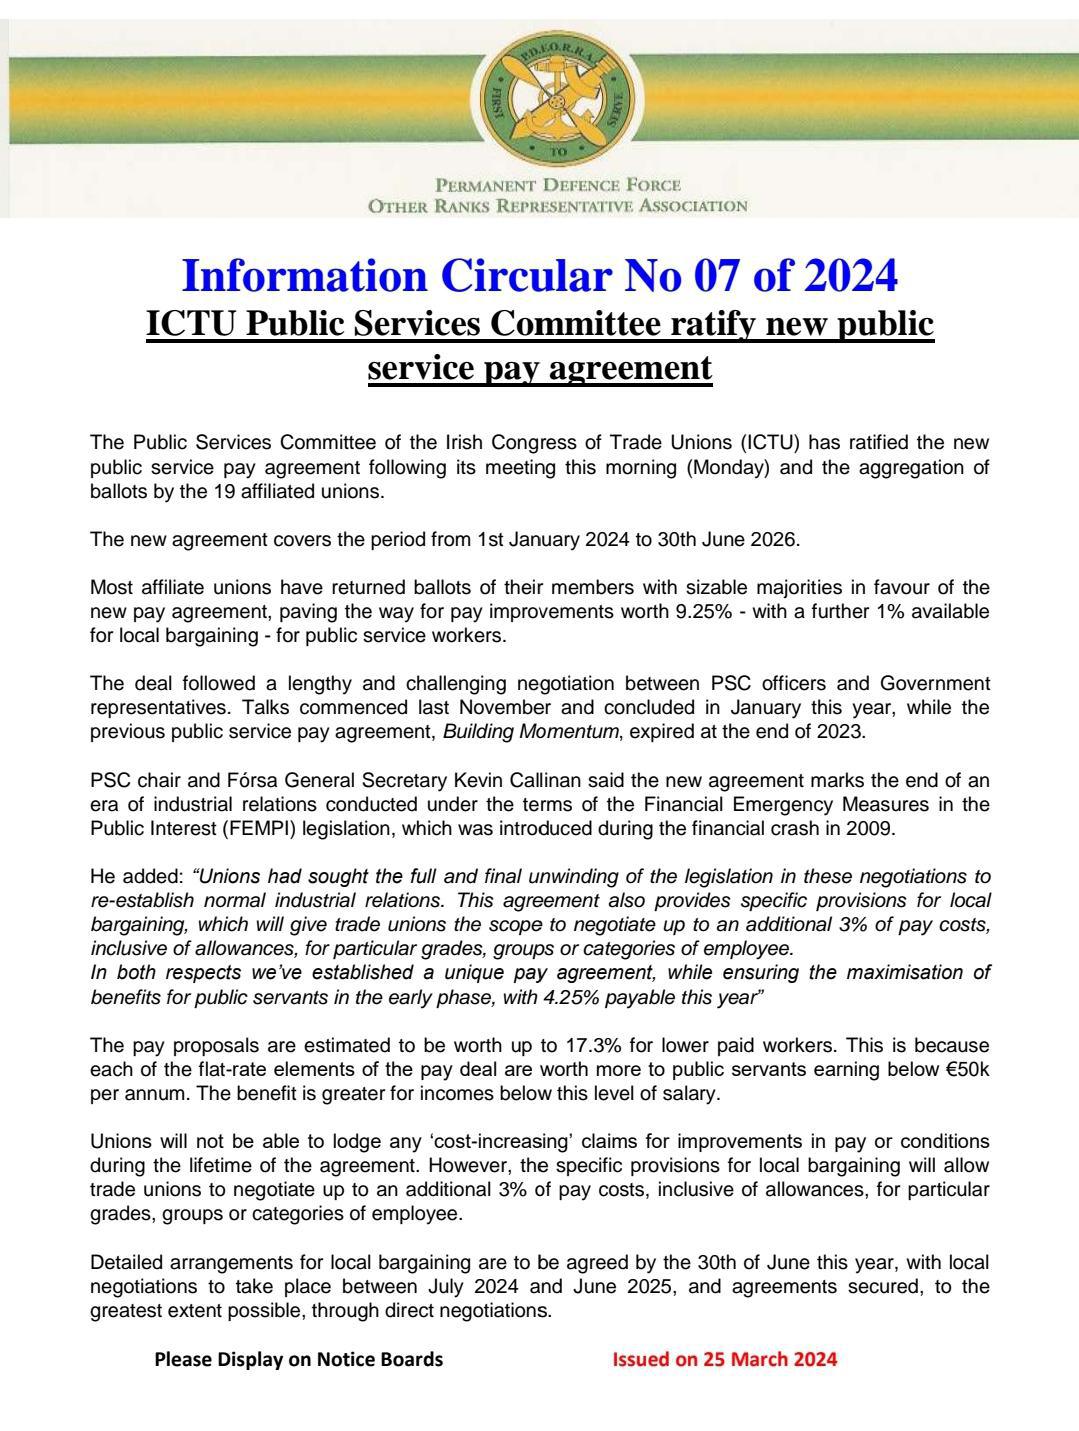 Information Circular No 07 of 2024 - ICTU Public Services Committee ratify new public service pay agreement